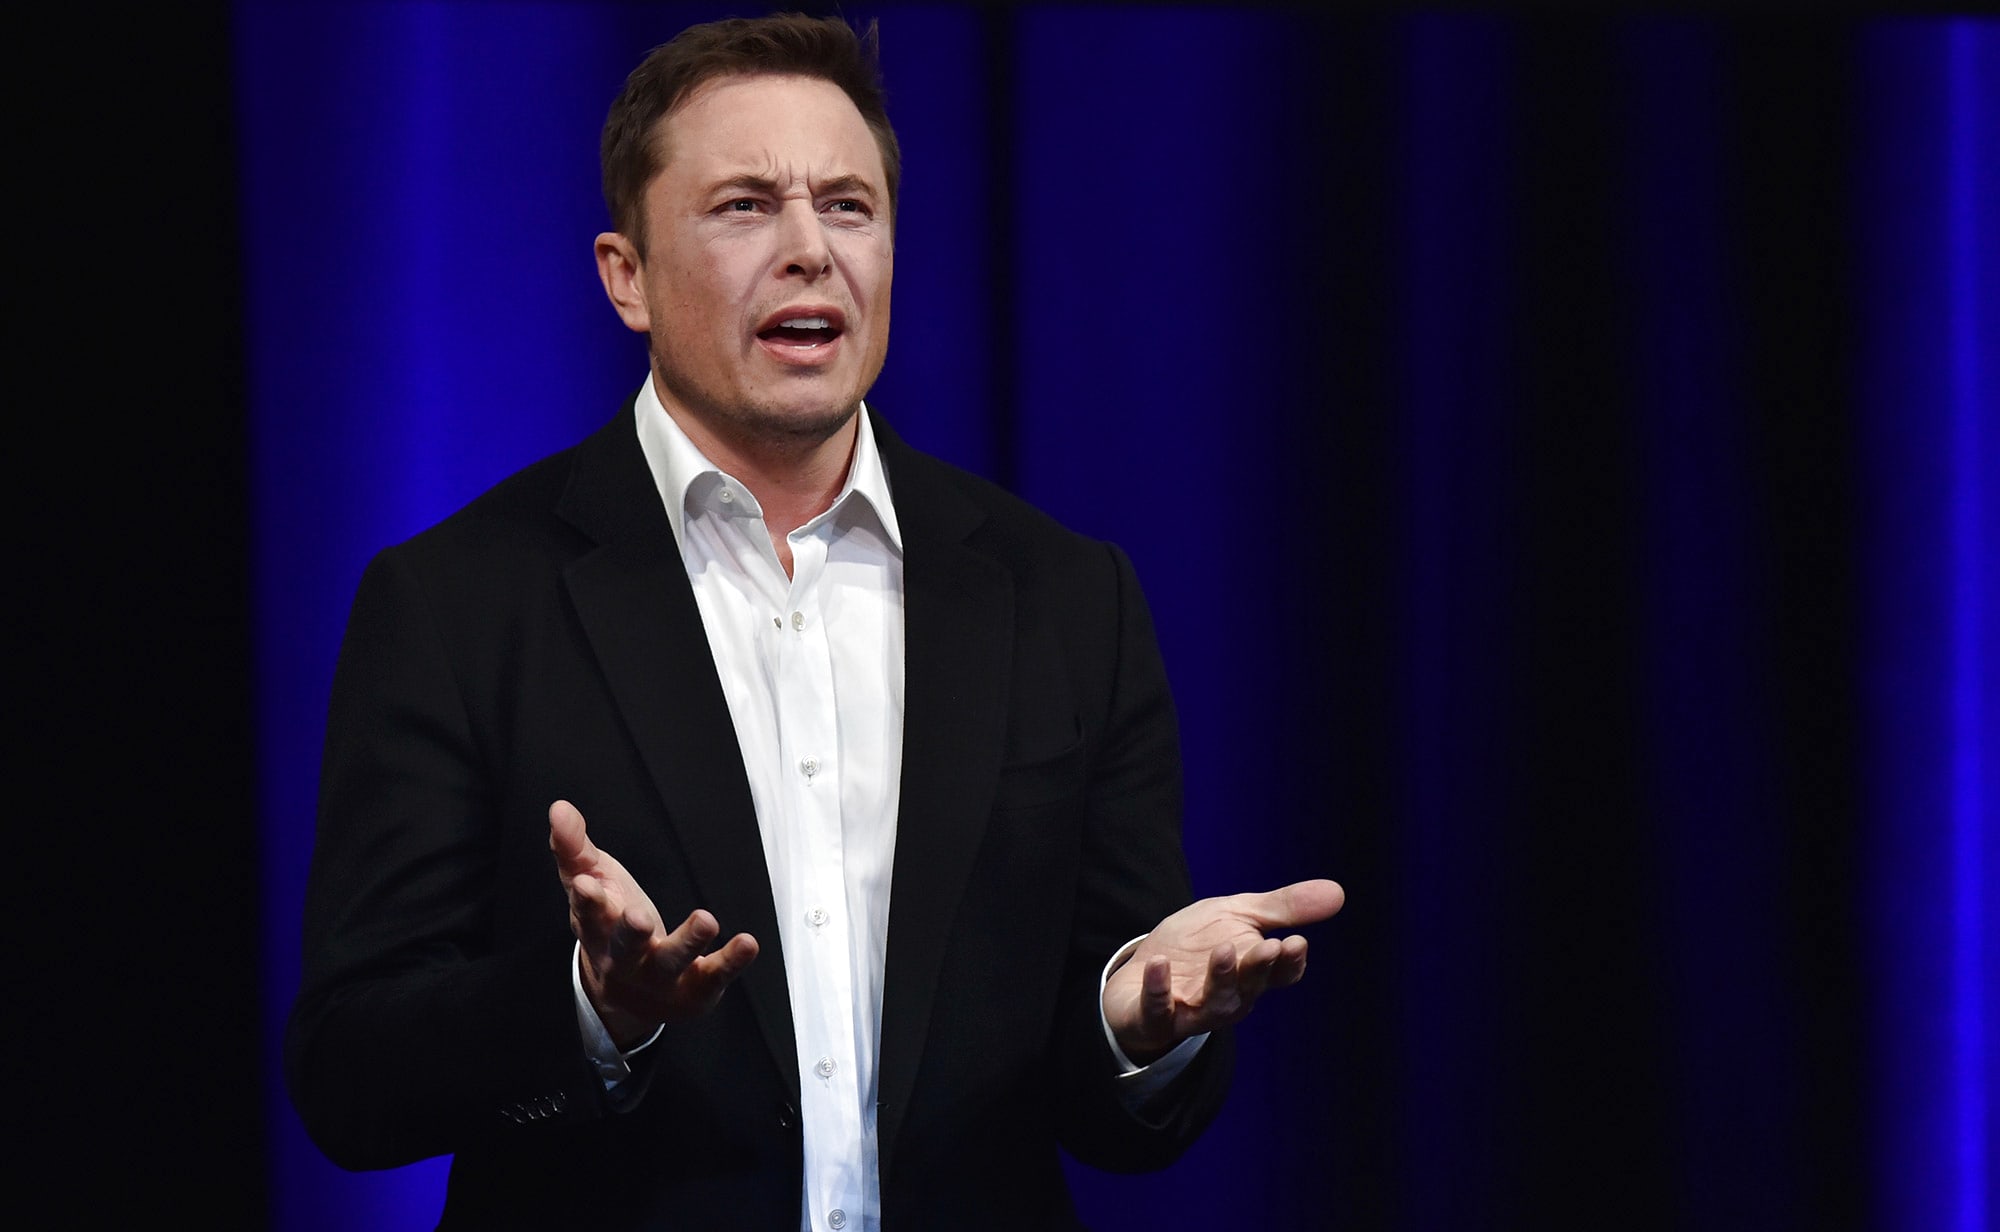 Elon Musk denies the report of an affair with Sergey Brin's Wife - Asiana Times